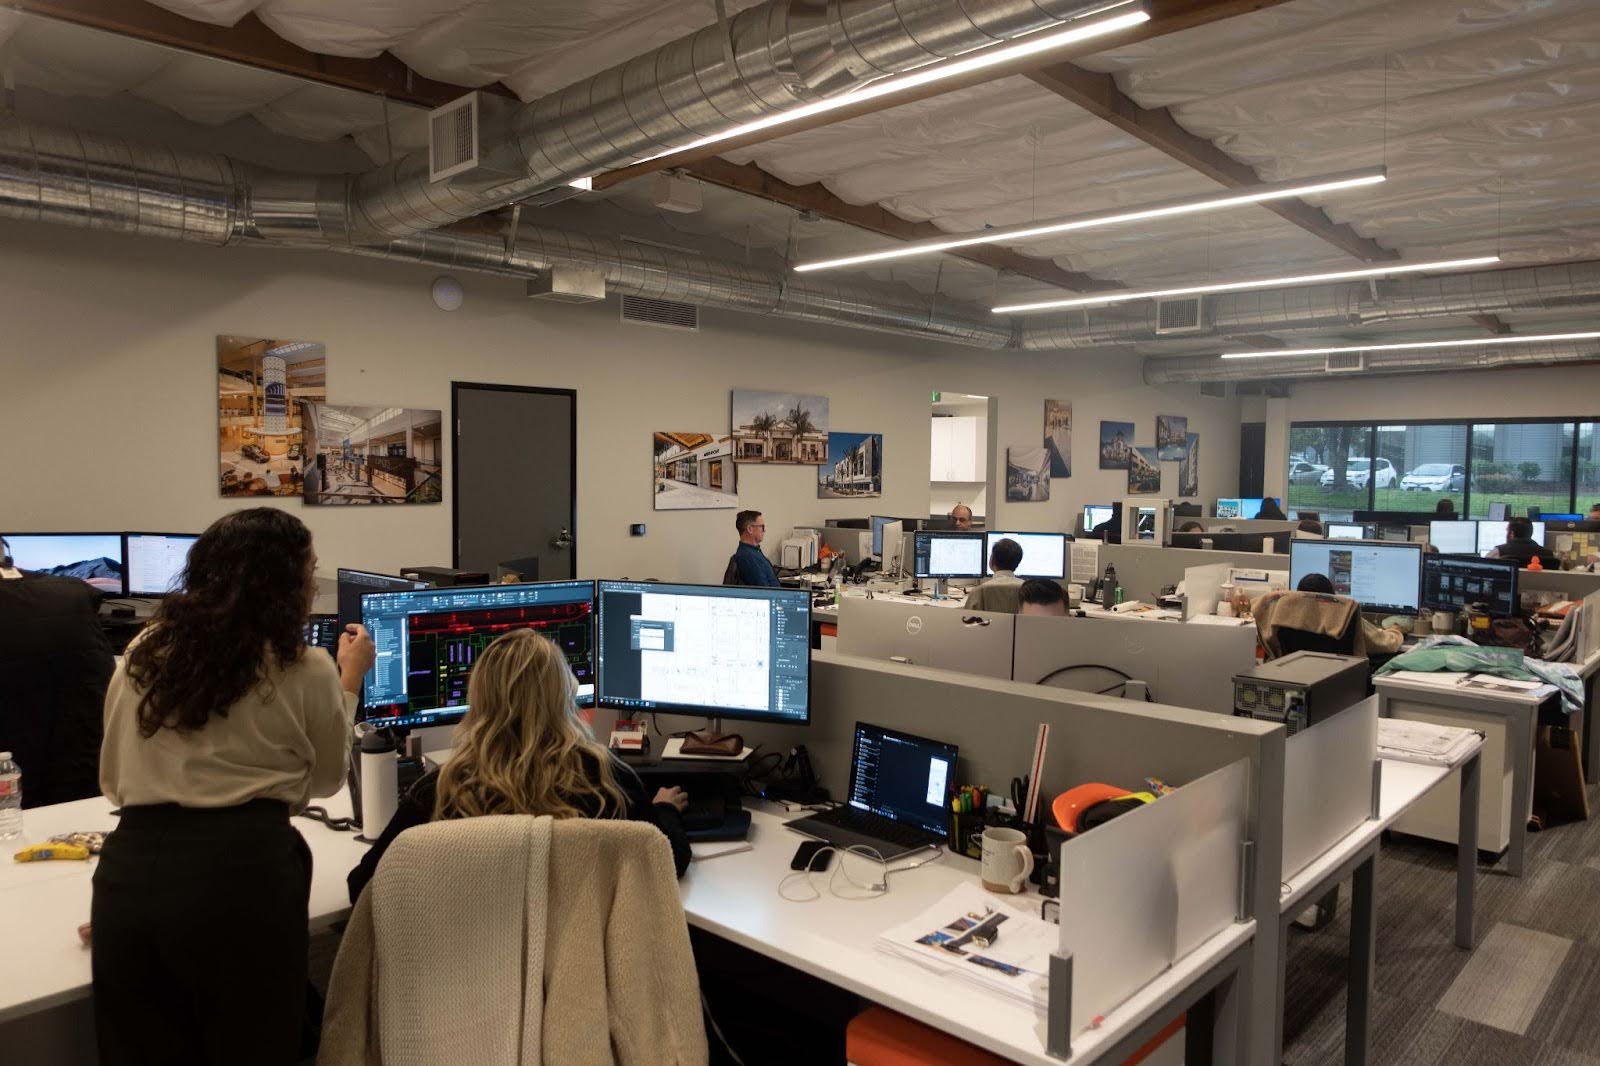 The ADC team collaborating on a project, one of the many things that makes the opportunities here some of the most fulfilling jobs in architecture and design.